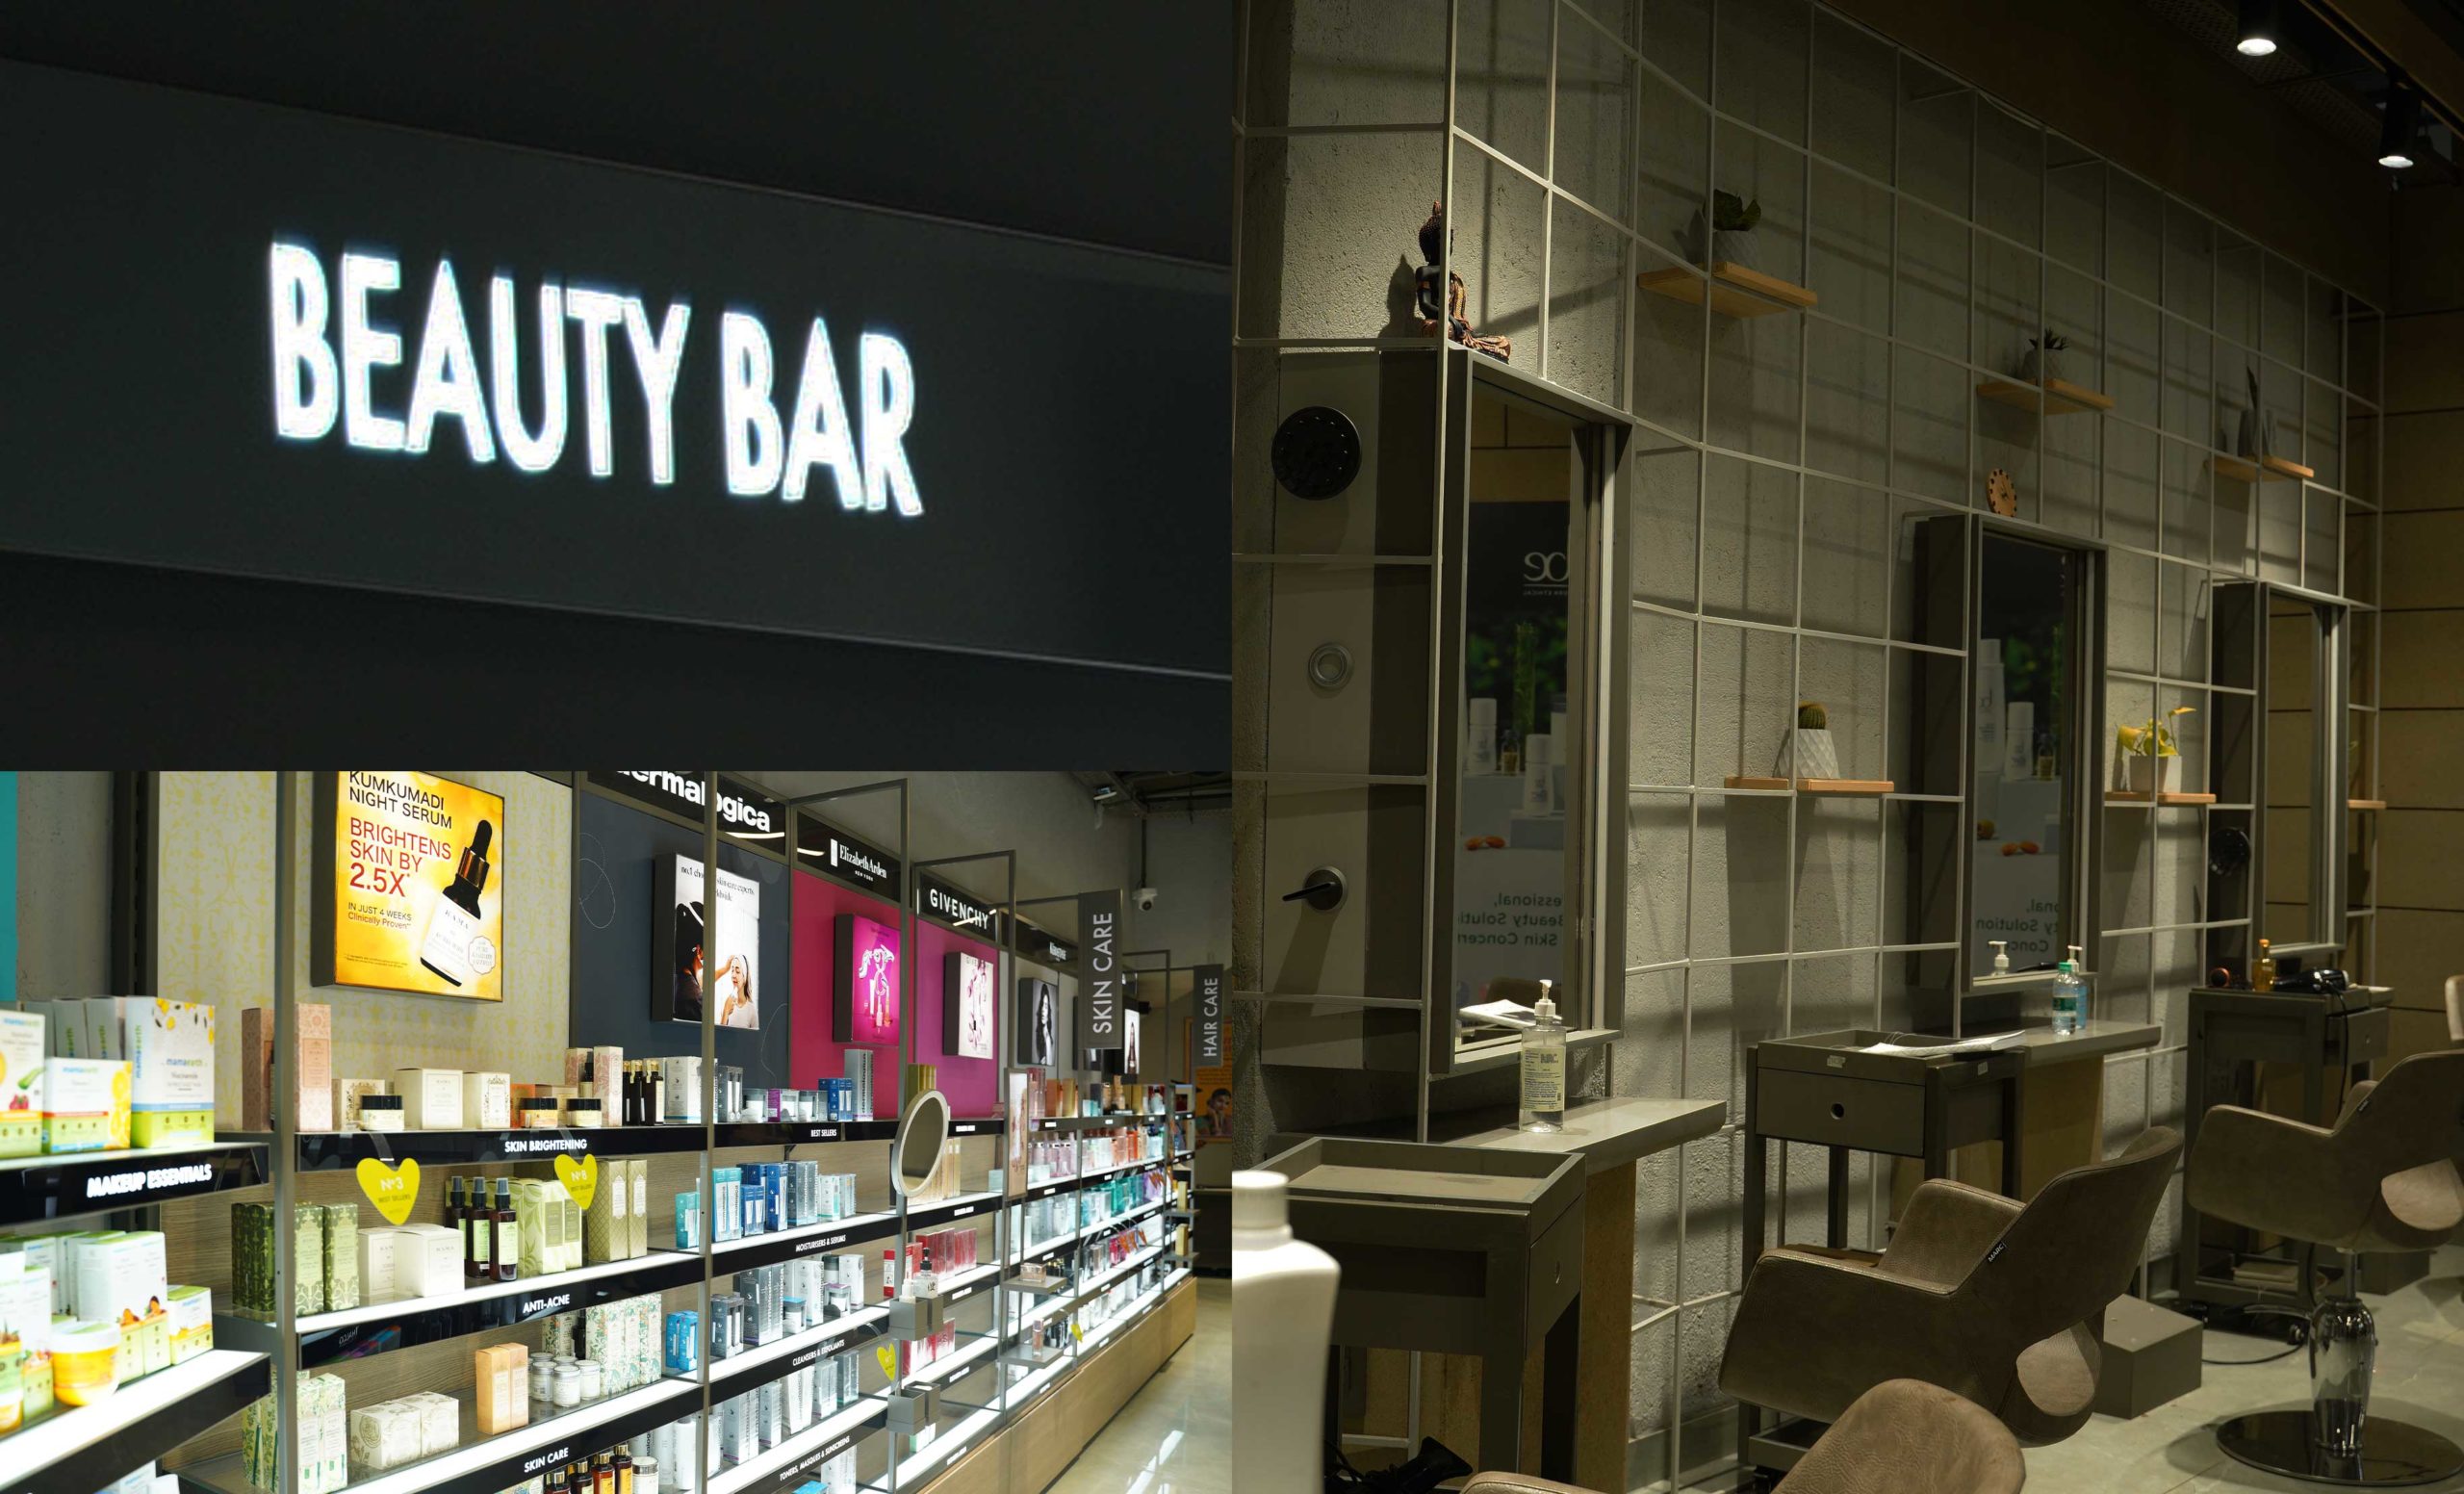 This New Beauty Experience Store In Mumbai Has Flash Makeovers, A Lipstick Bar, Luxe Brands And Lots More!